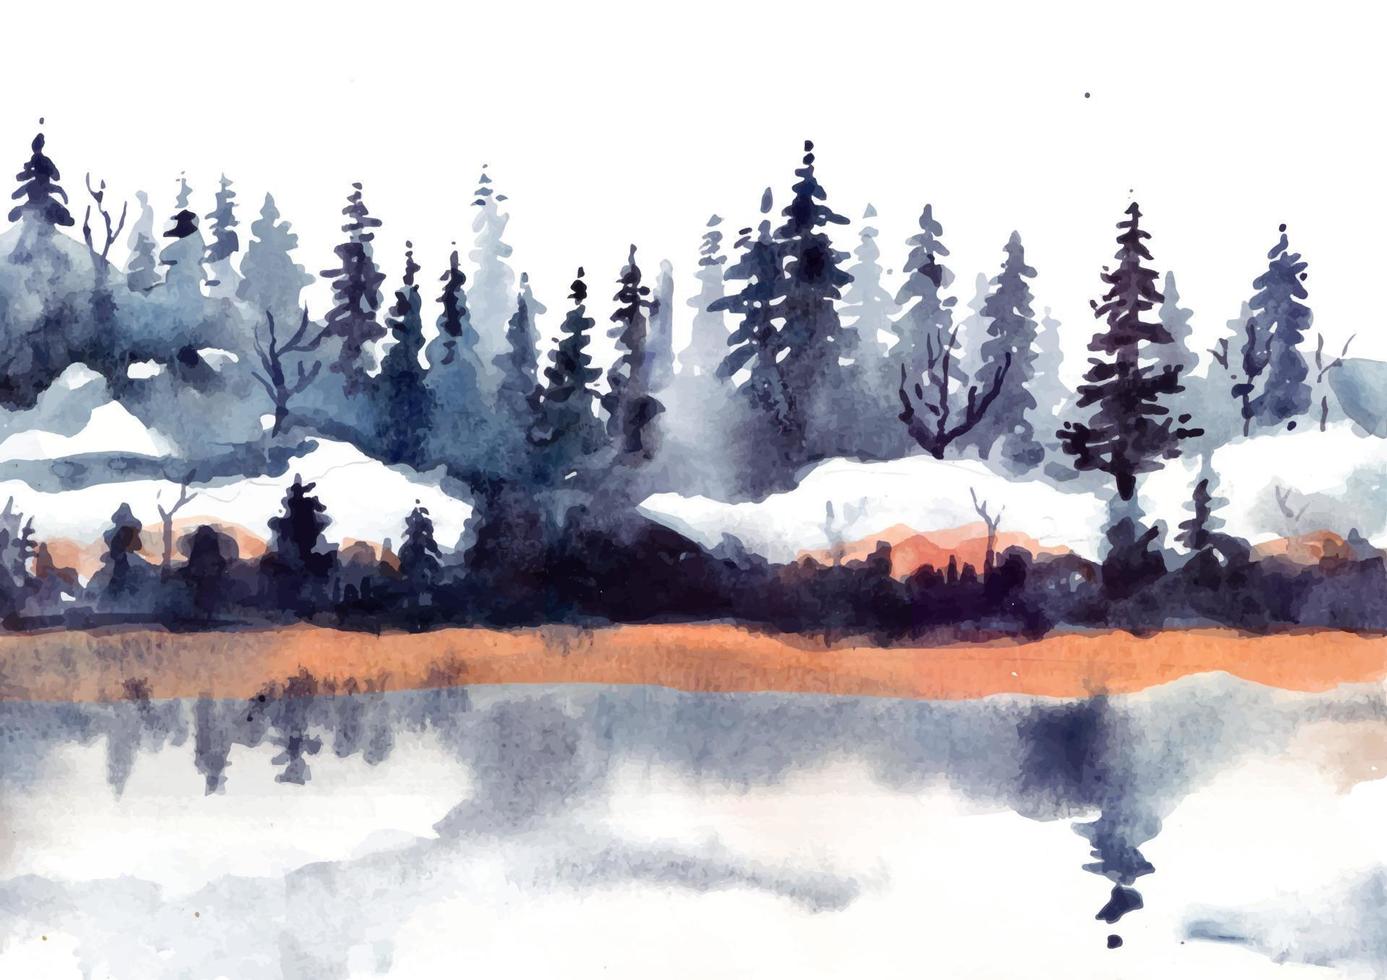 Reflection of winter landscape with pine trees and snow watercolor vector